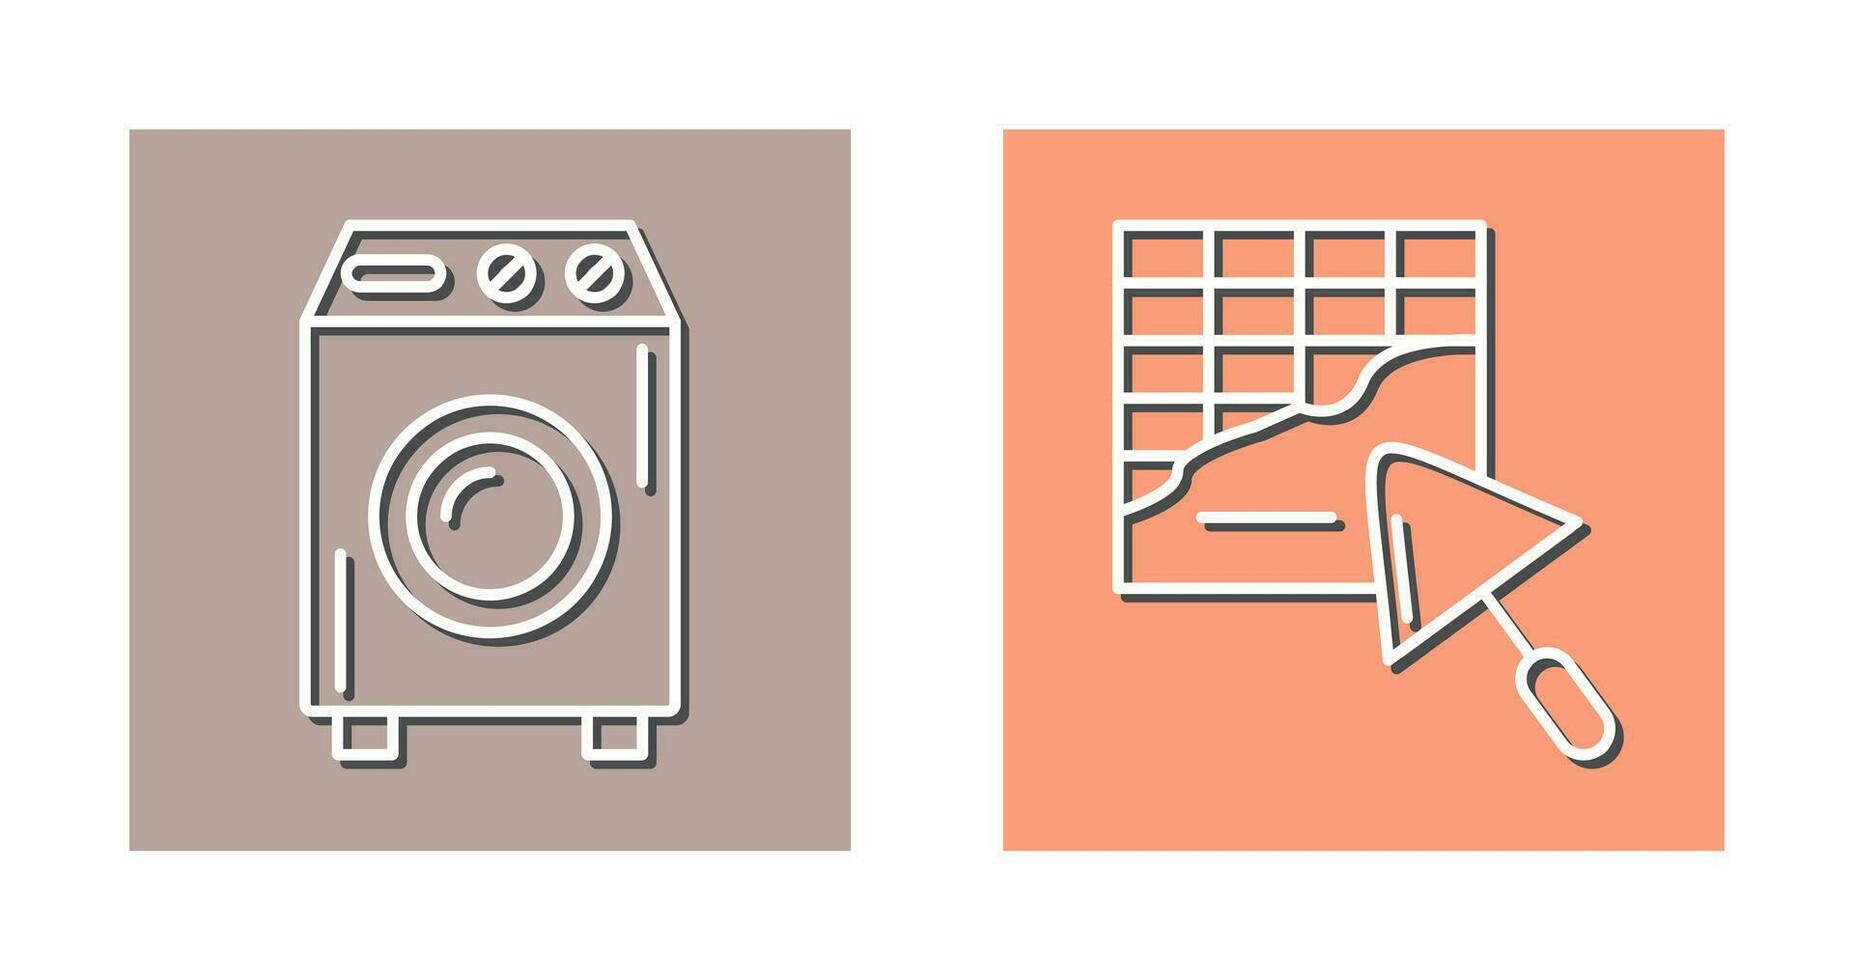 Washing Machine and Plastering Icon vector